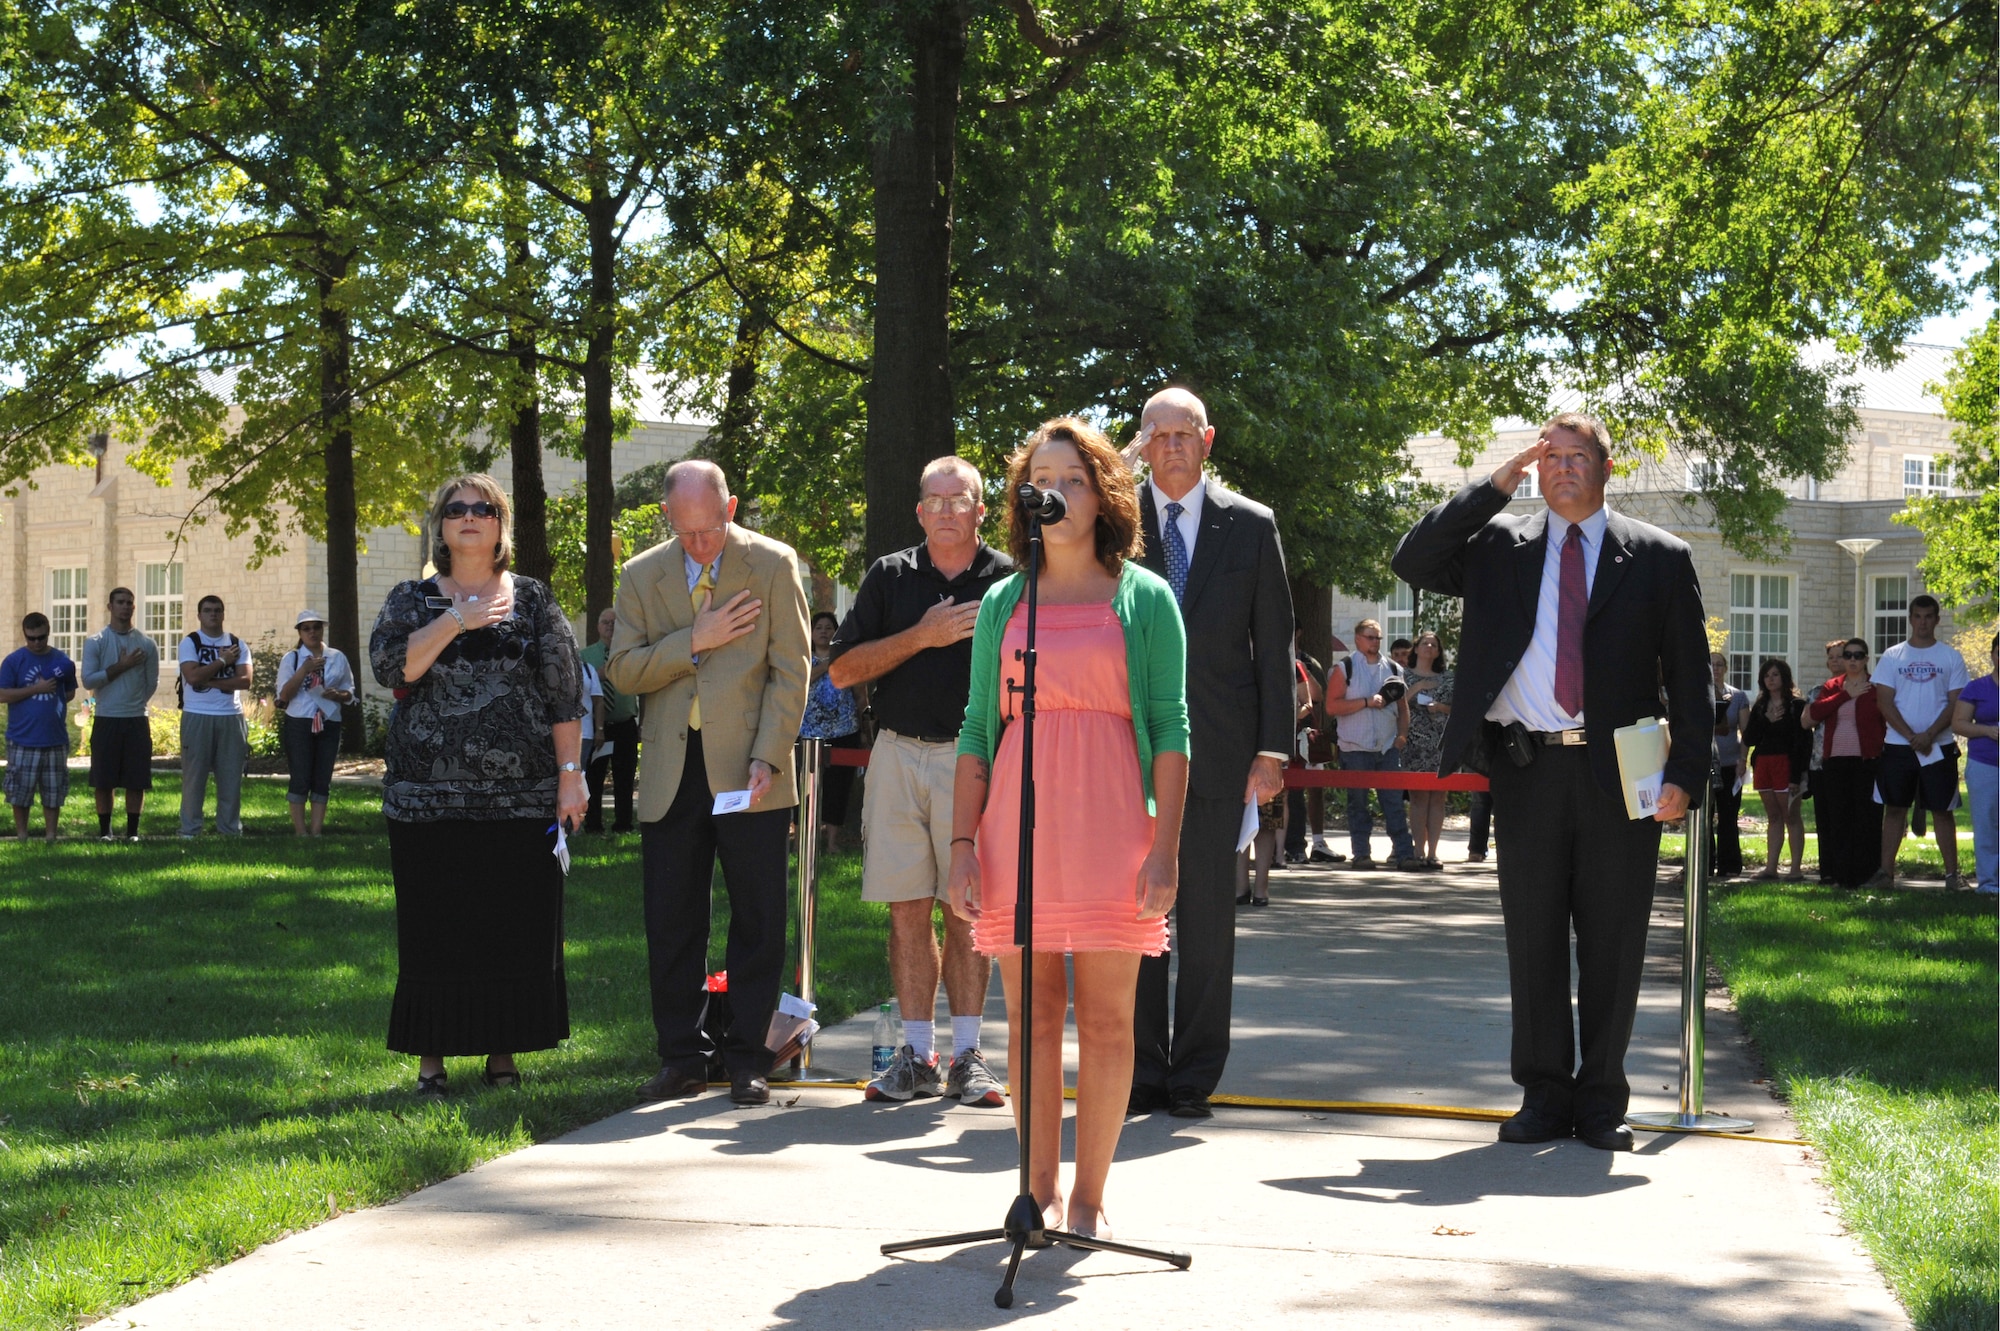 WARRENSBURG, Mo. -- Anna Kay, a University of Central Missouri freshman, sings the National Anthem during a 9/11 Remembrance Ceremony at UCM Sept. 11, 2012. The ceremony included a welcome from Charles Ambrose, UCM President, and keynote remarks from retired Brig. Gen. Larry D. Kay, executive director of the Missouri Veterans Commission. (U.S. Air Force photo/Heidi Hunt) (Released) 